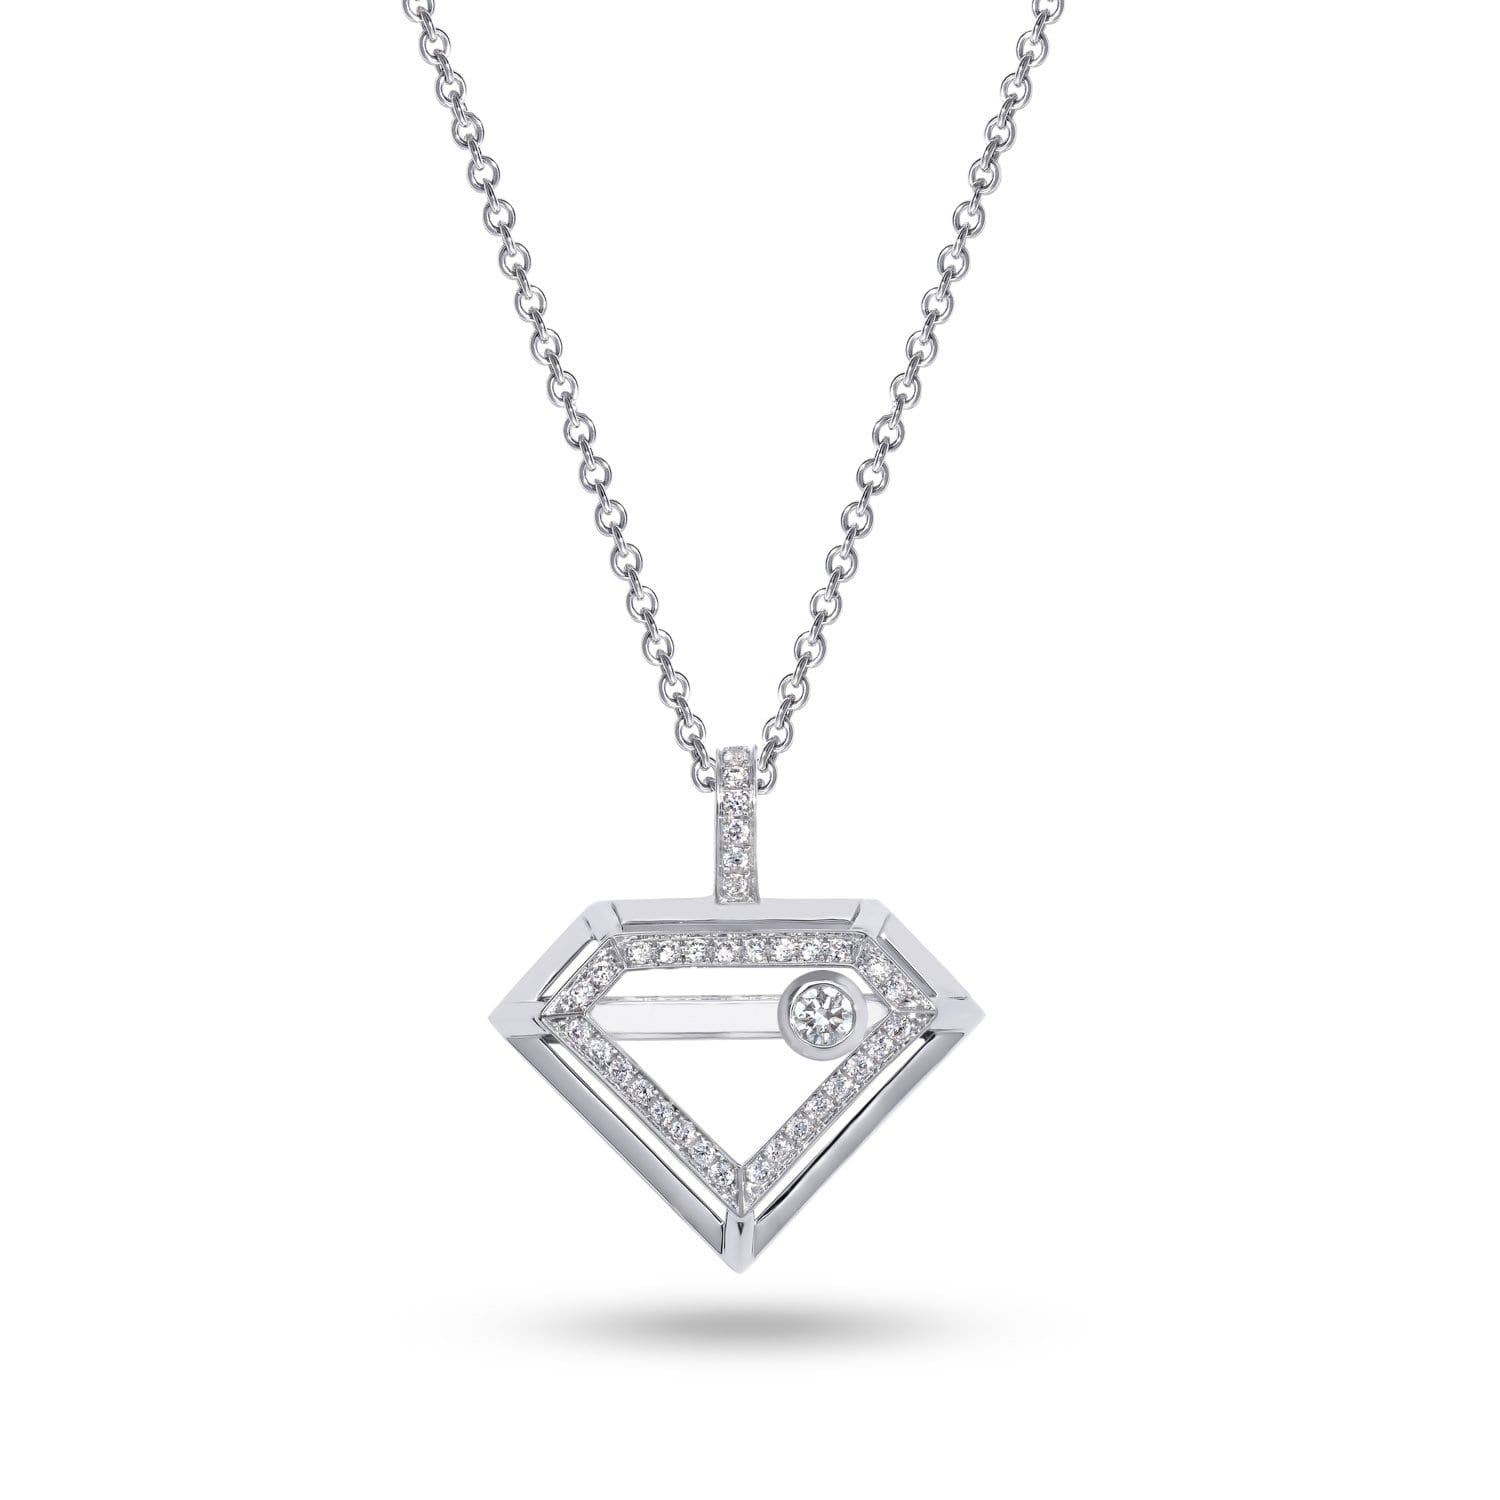 YOU MOVE ME All Diamond Necklace